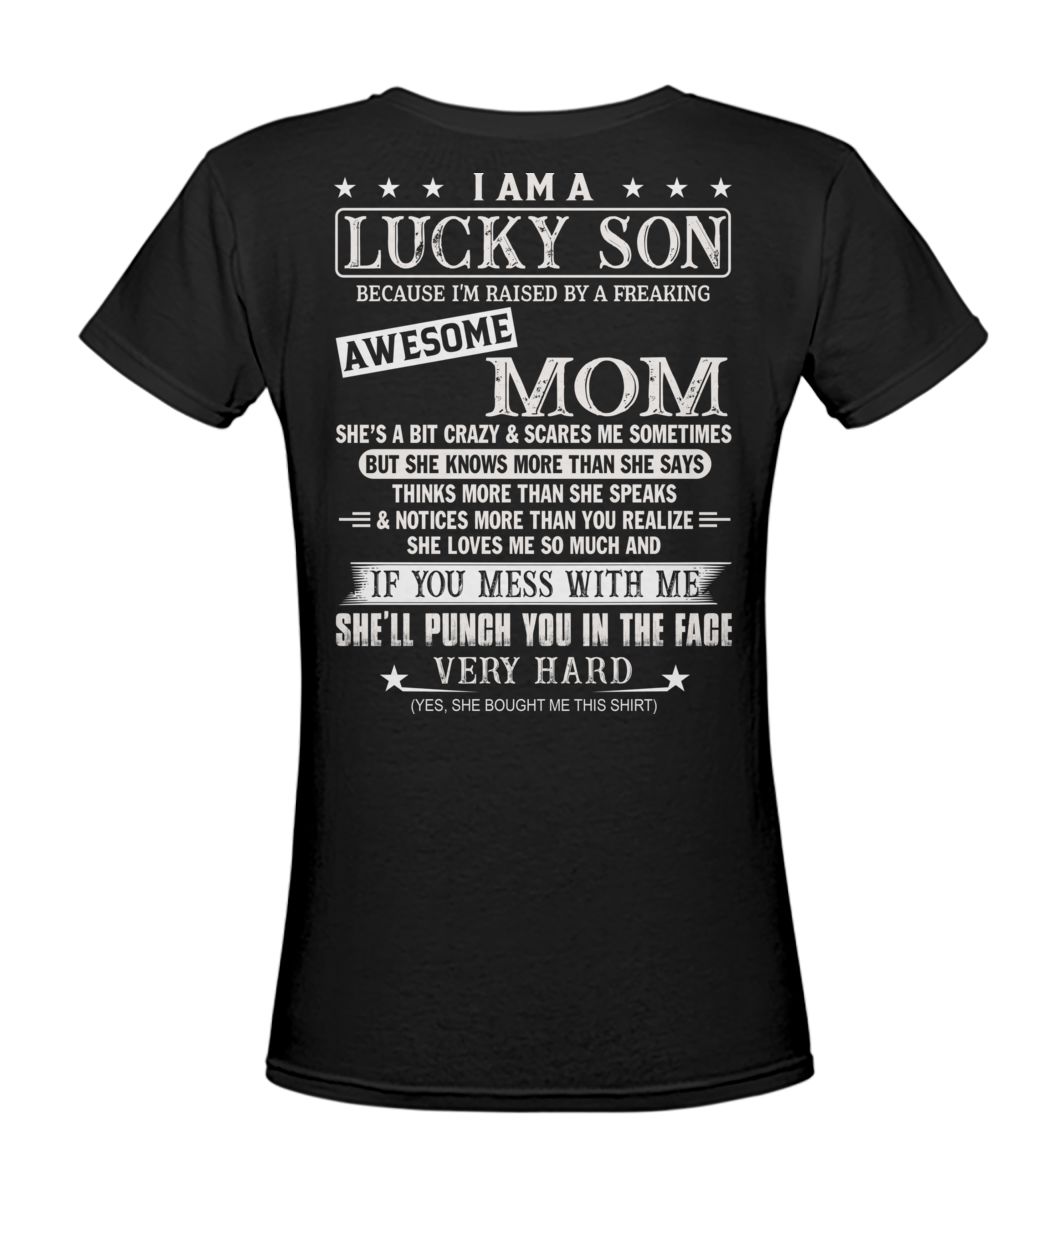 I am lucky son because I'm raised by a freaking awesome mom women's v-neck